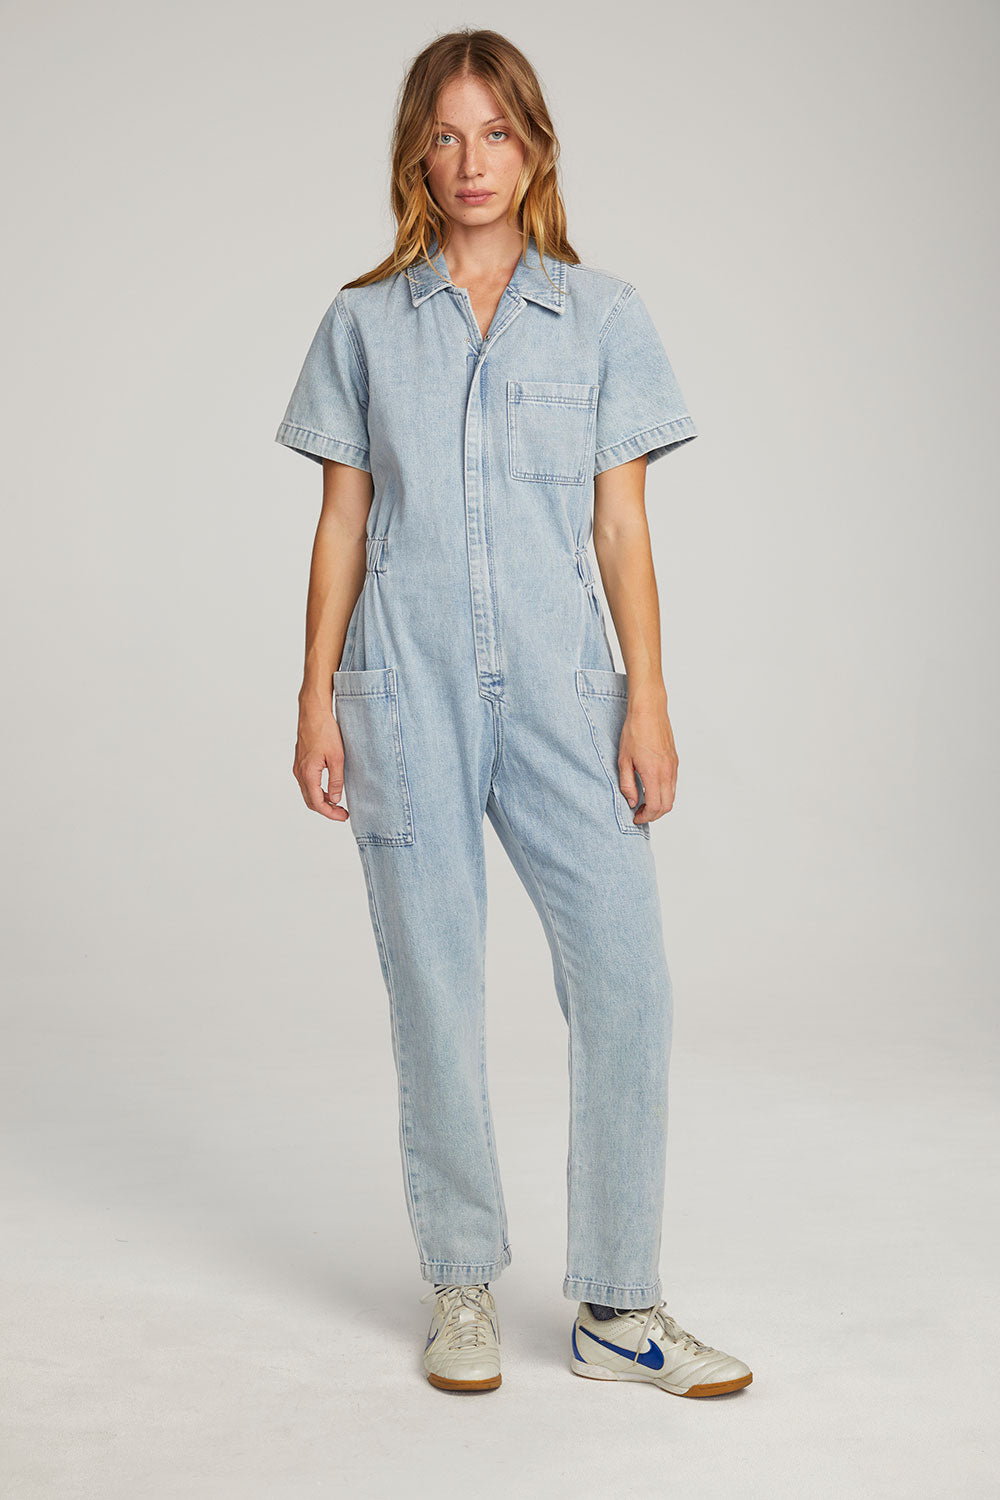 Ashland Classic Blue Jumpsuit WOMENS chaserbrand